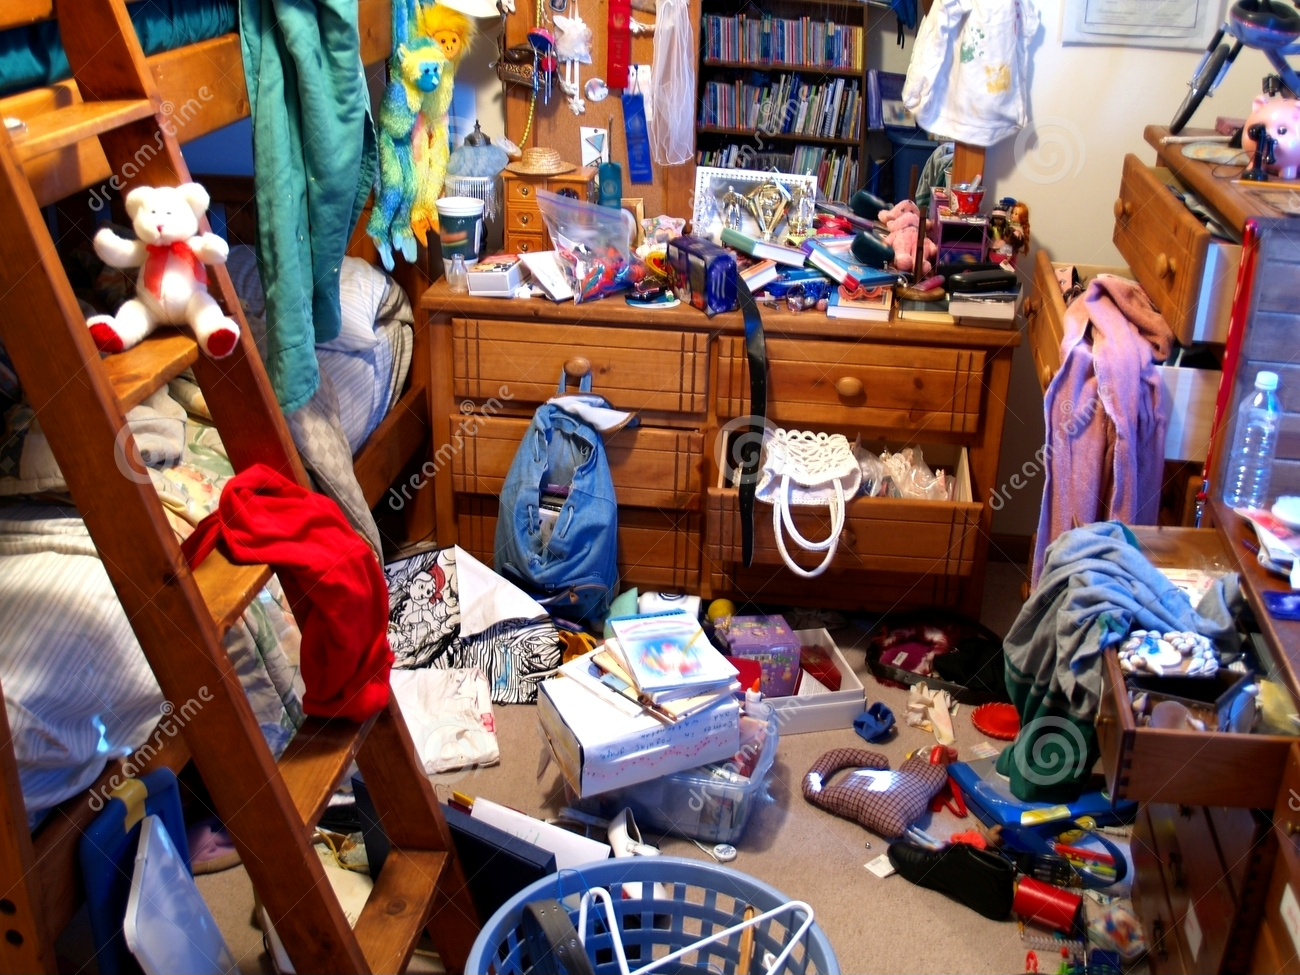 Clutter Trouble Spots: 10 Areas of Focus to Achieve an Organized Home